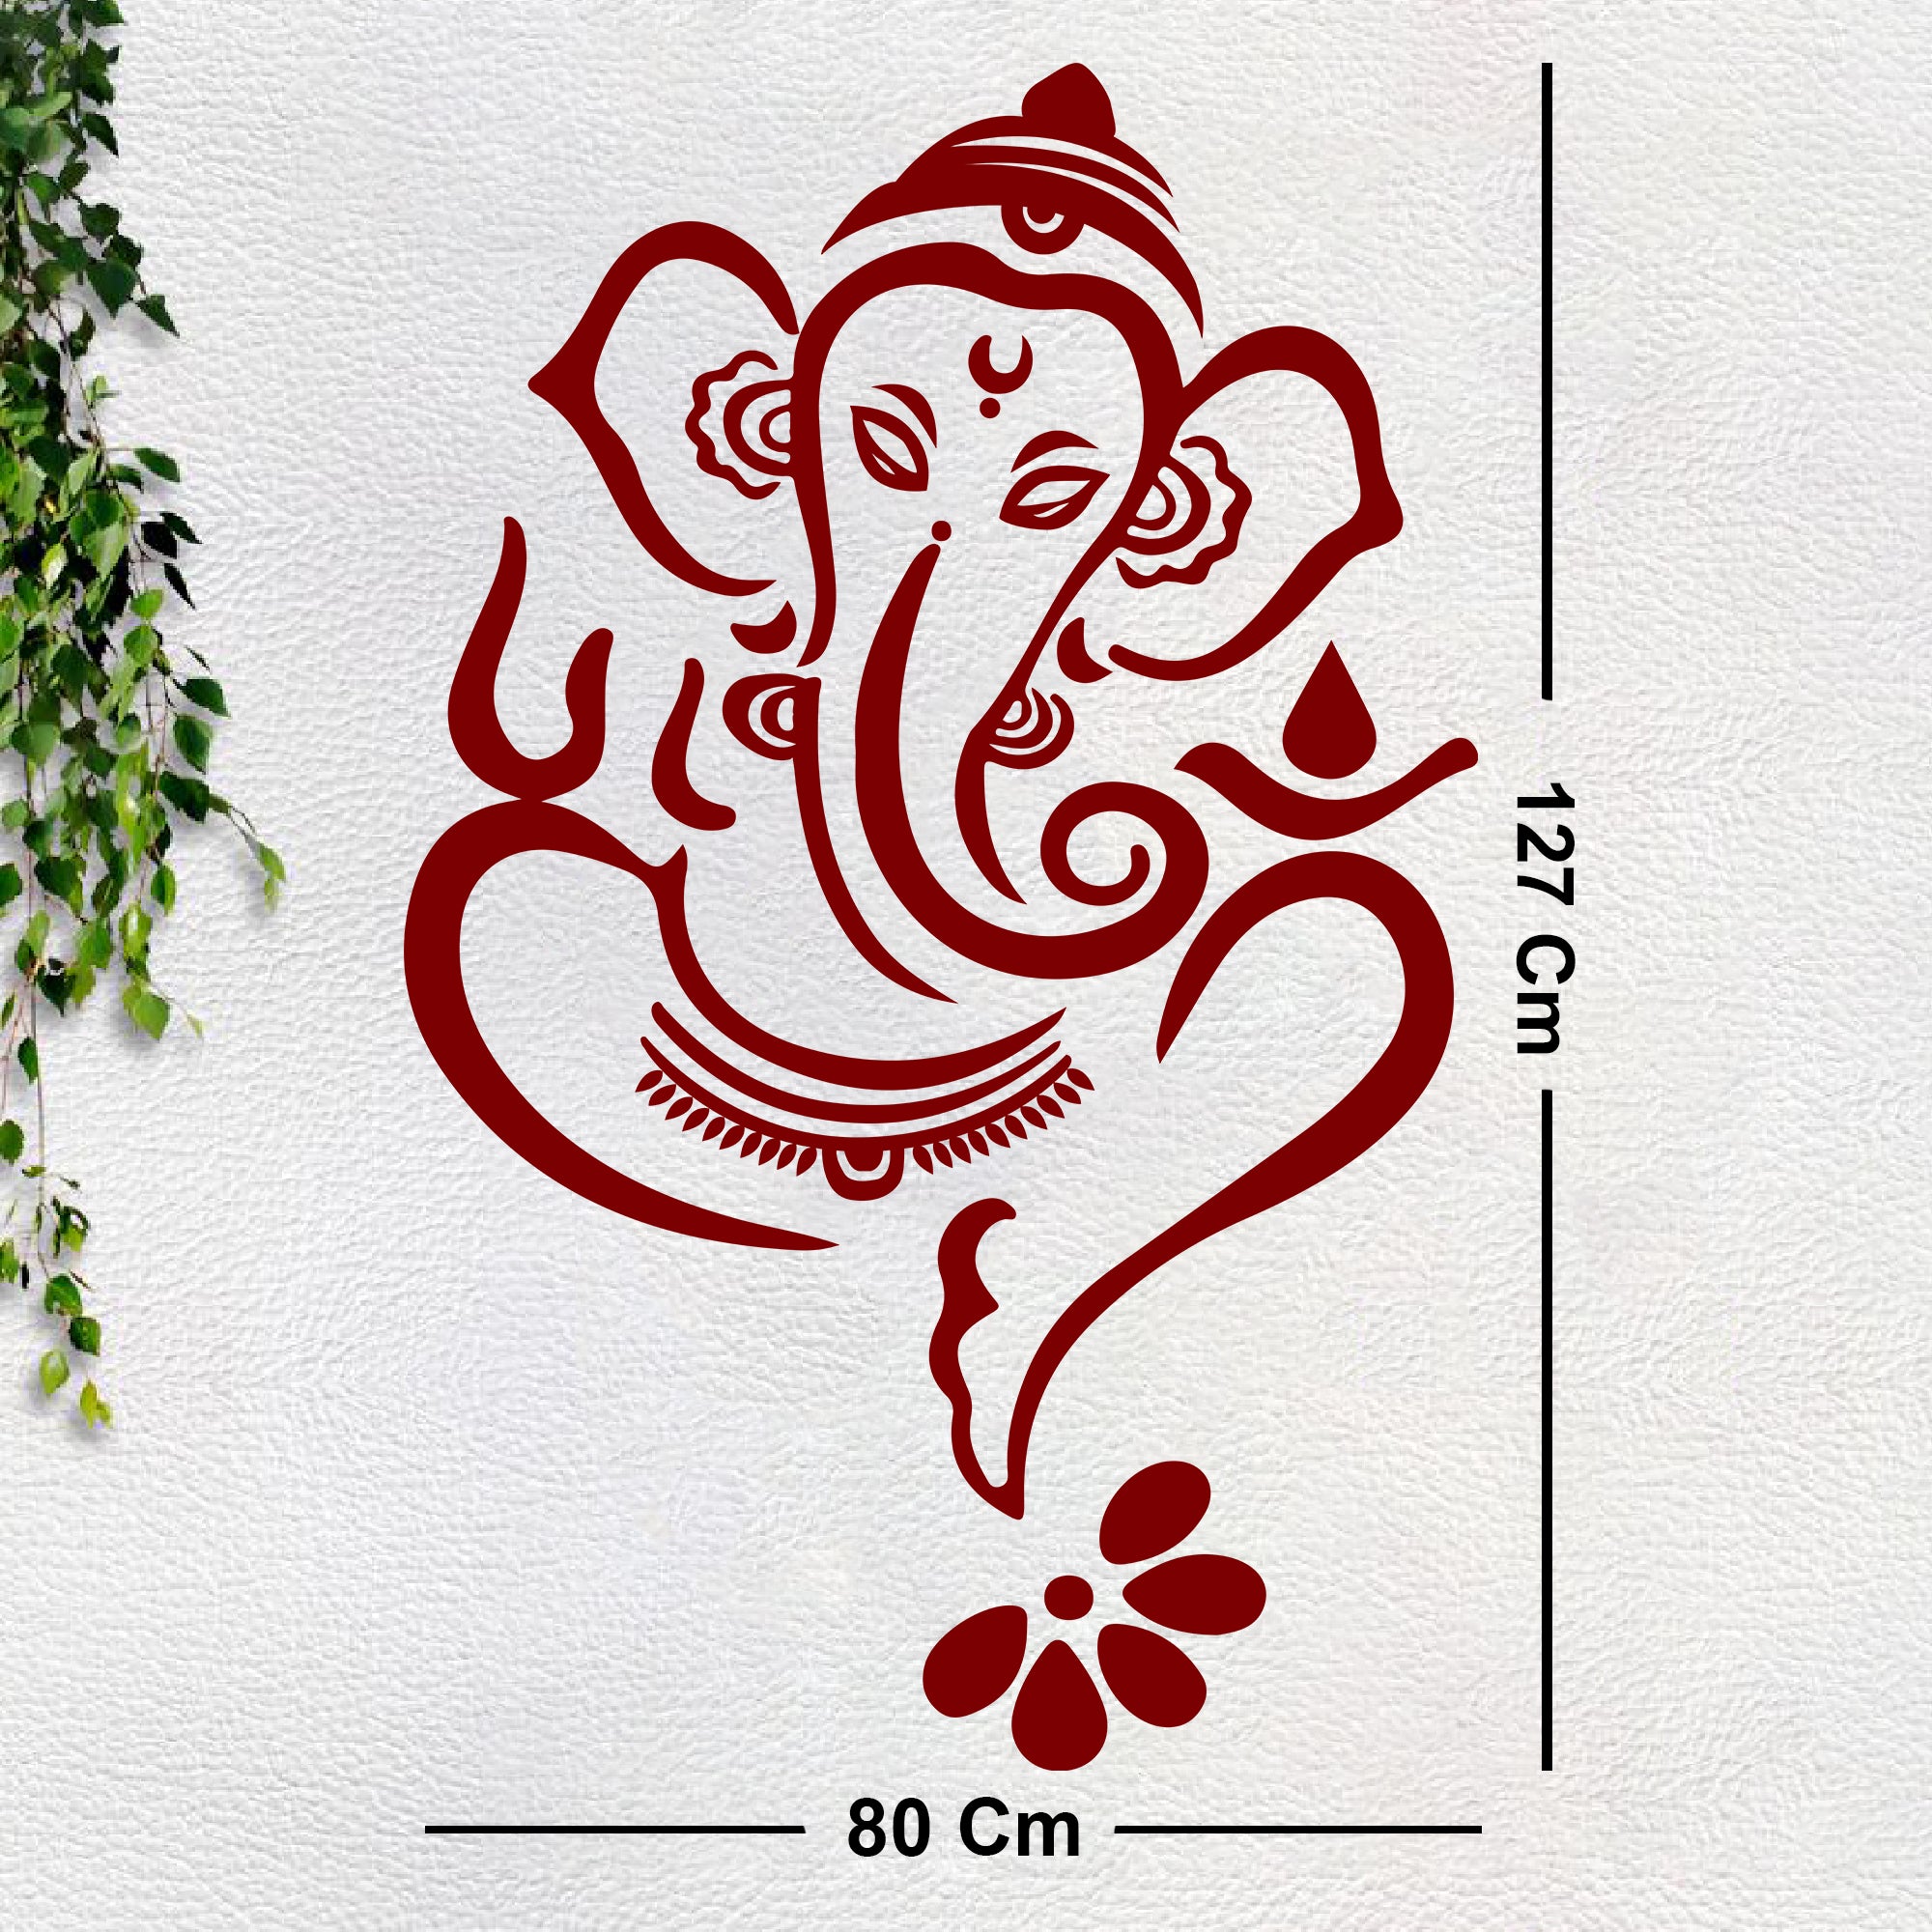 Lord Ganesha Wall Sticker for Home in Brown Color